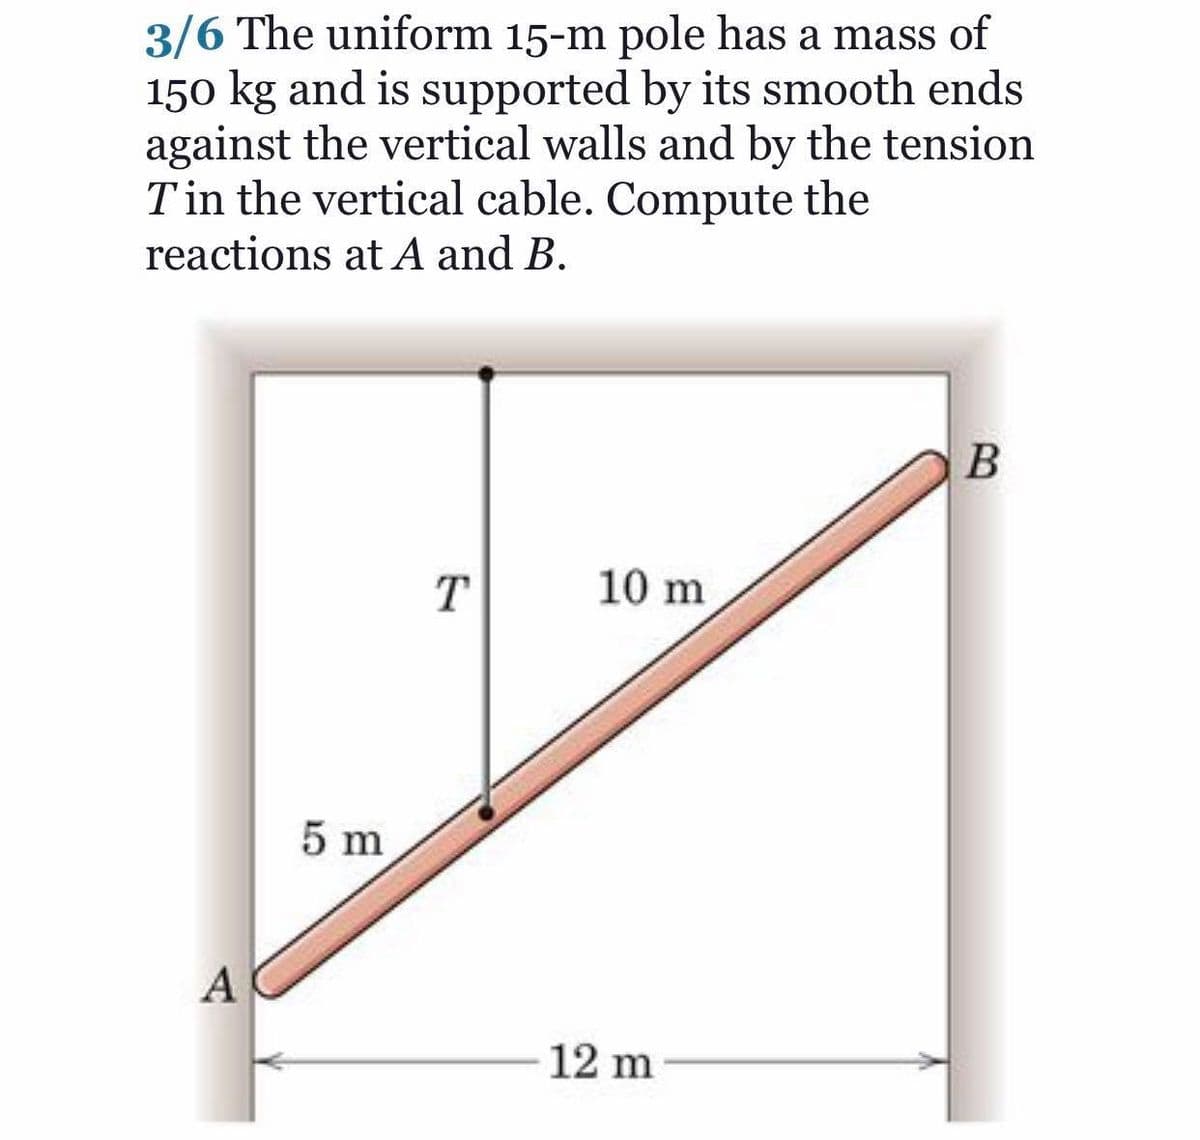 3/6 The uniform 15-m pole has a mass of
150 kg and is supported by its smooth ends
against the vertical walls and by the tension
T in the vertical cable. Compute the
reactions at A and B.
T
10 m
5 m
A
12 m
